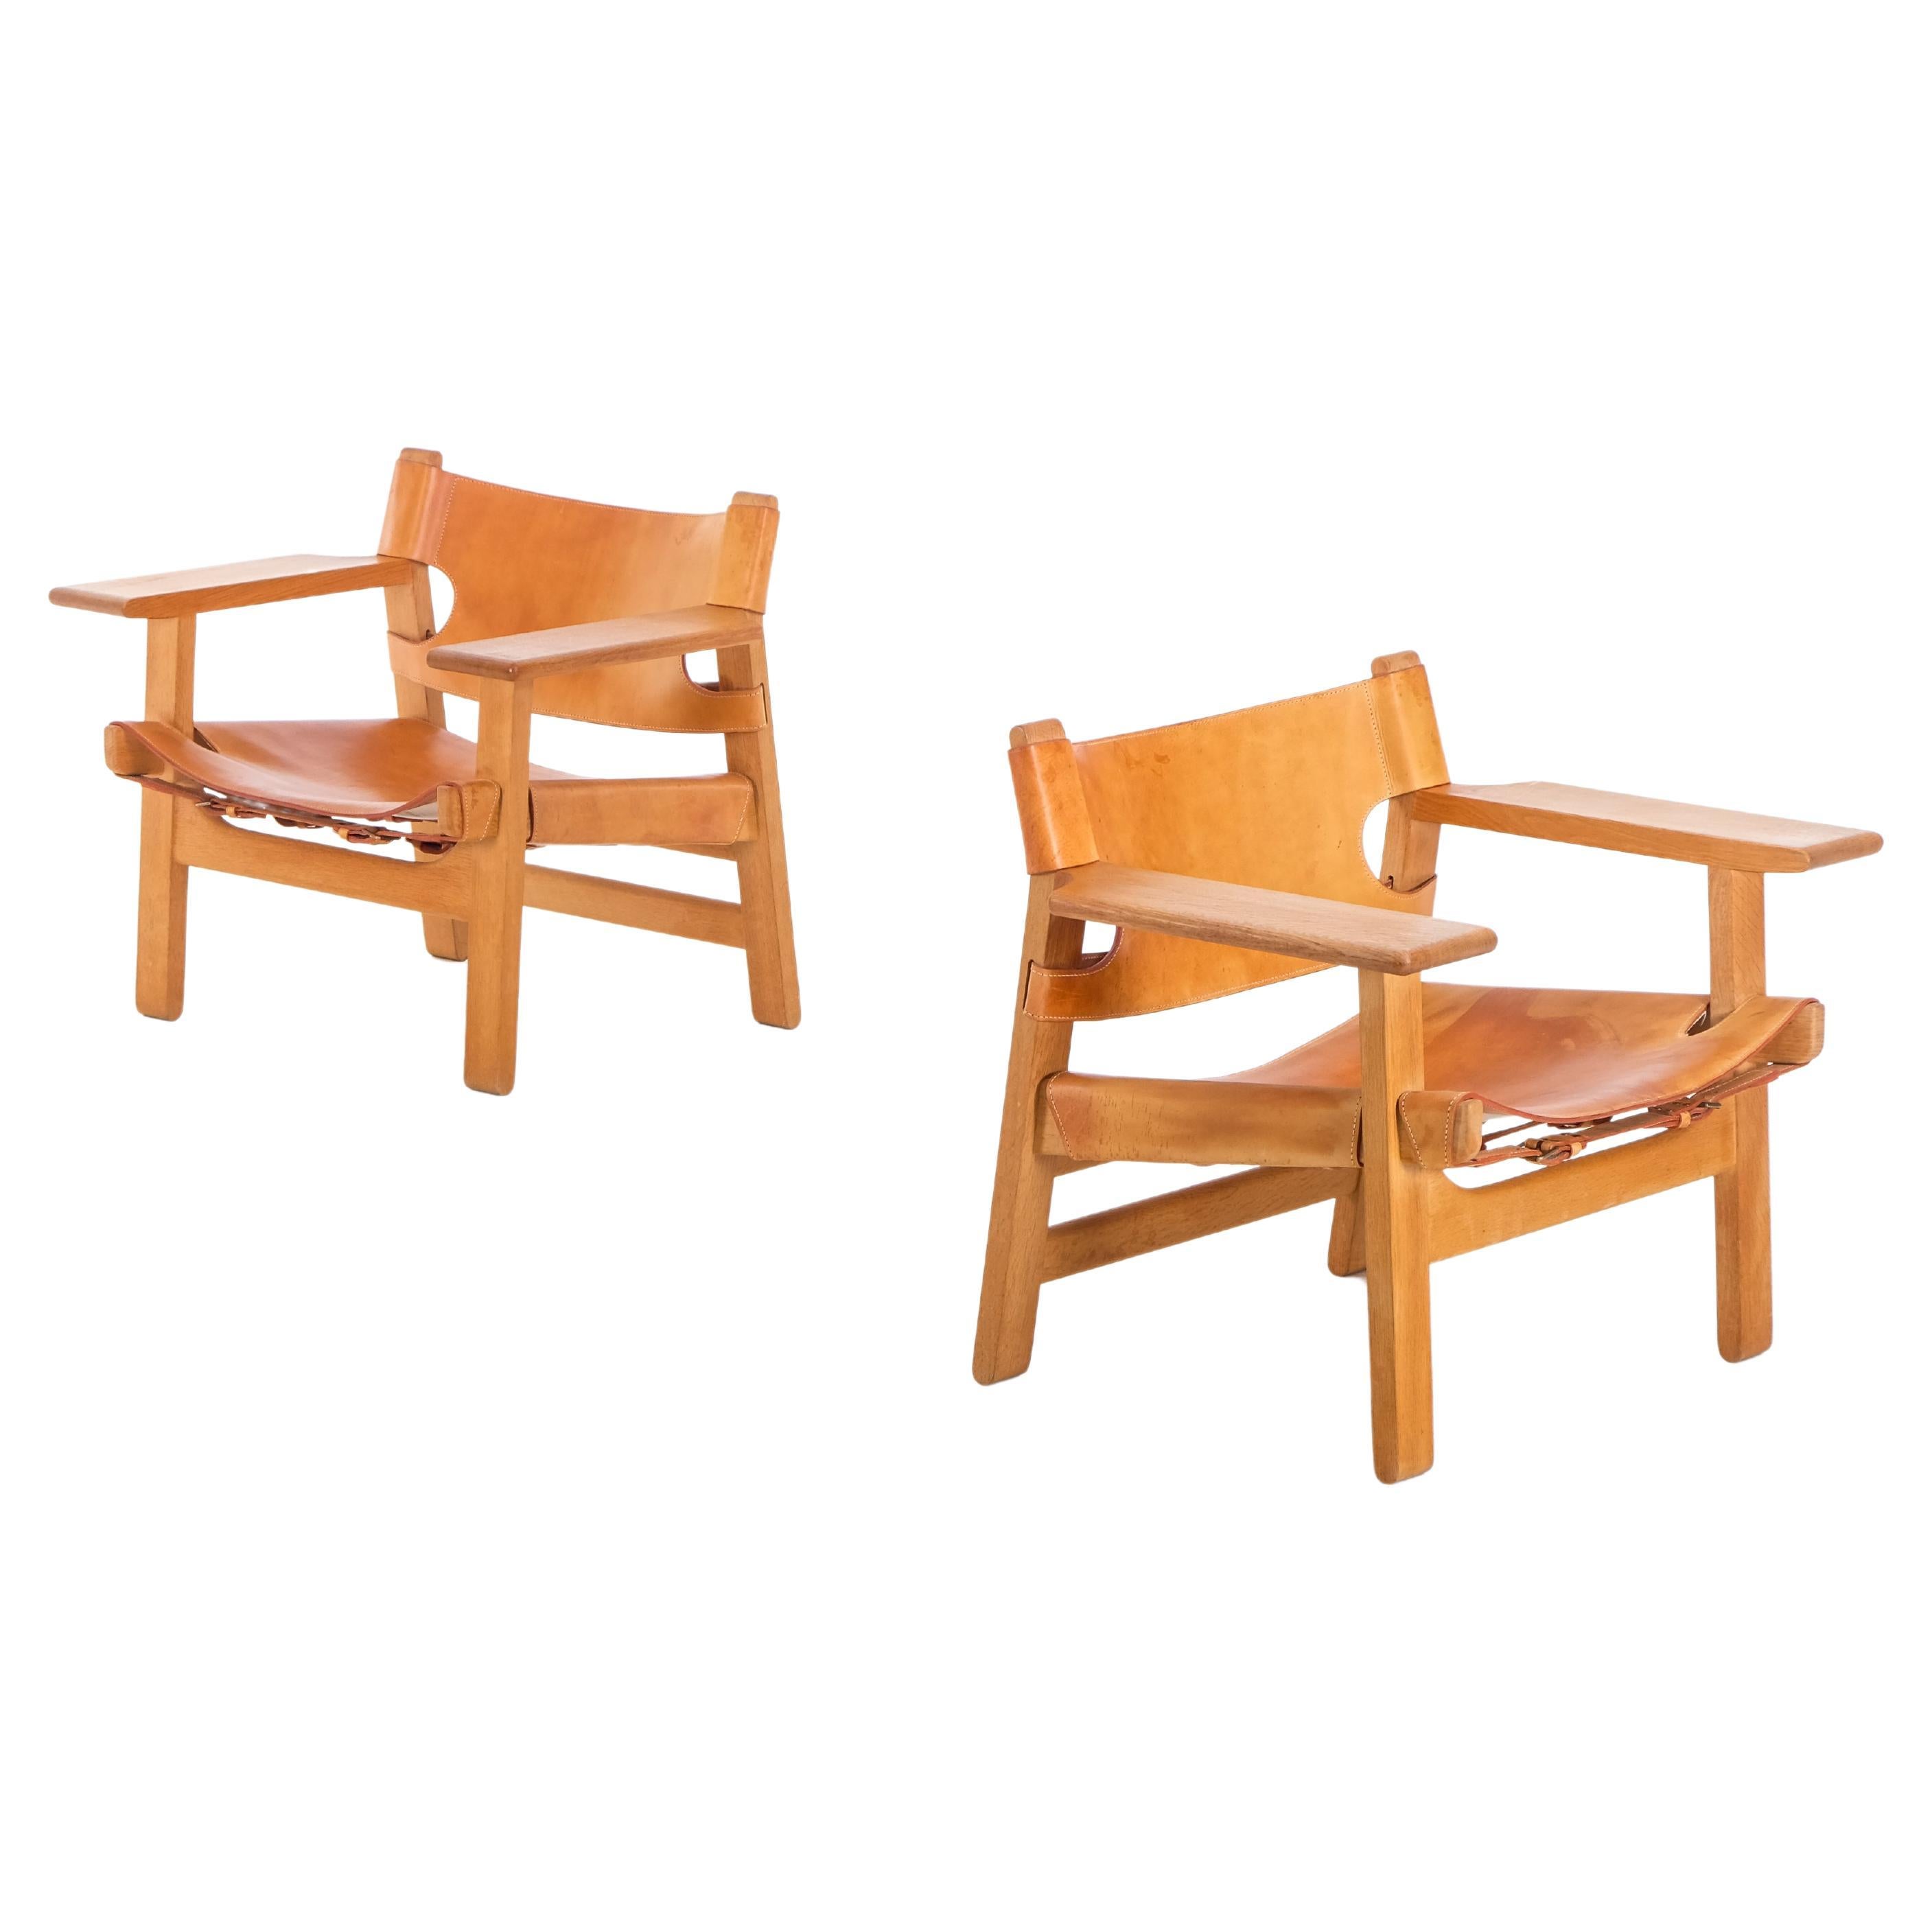 Pair of Spanish Chairs by Børge Mogensen, 1960s For Sale